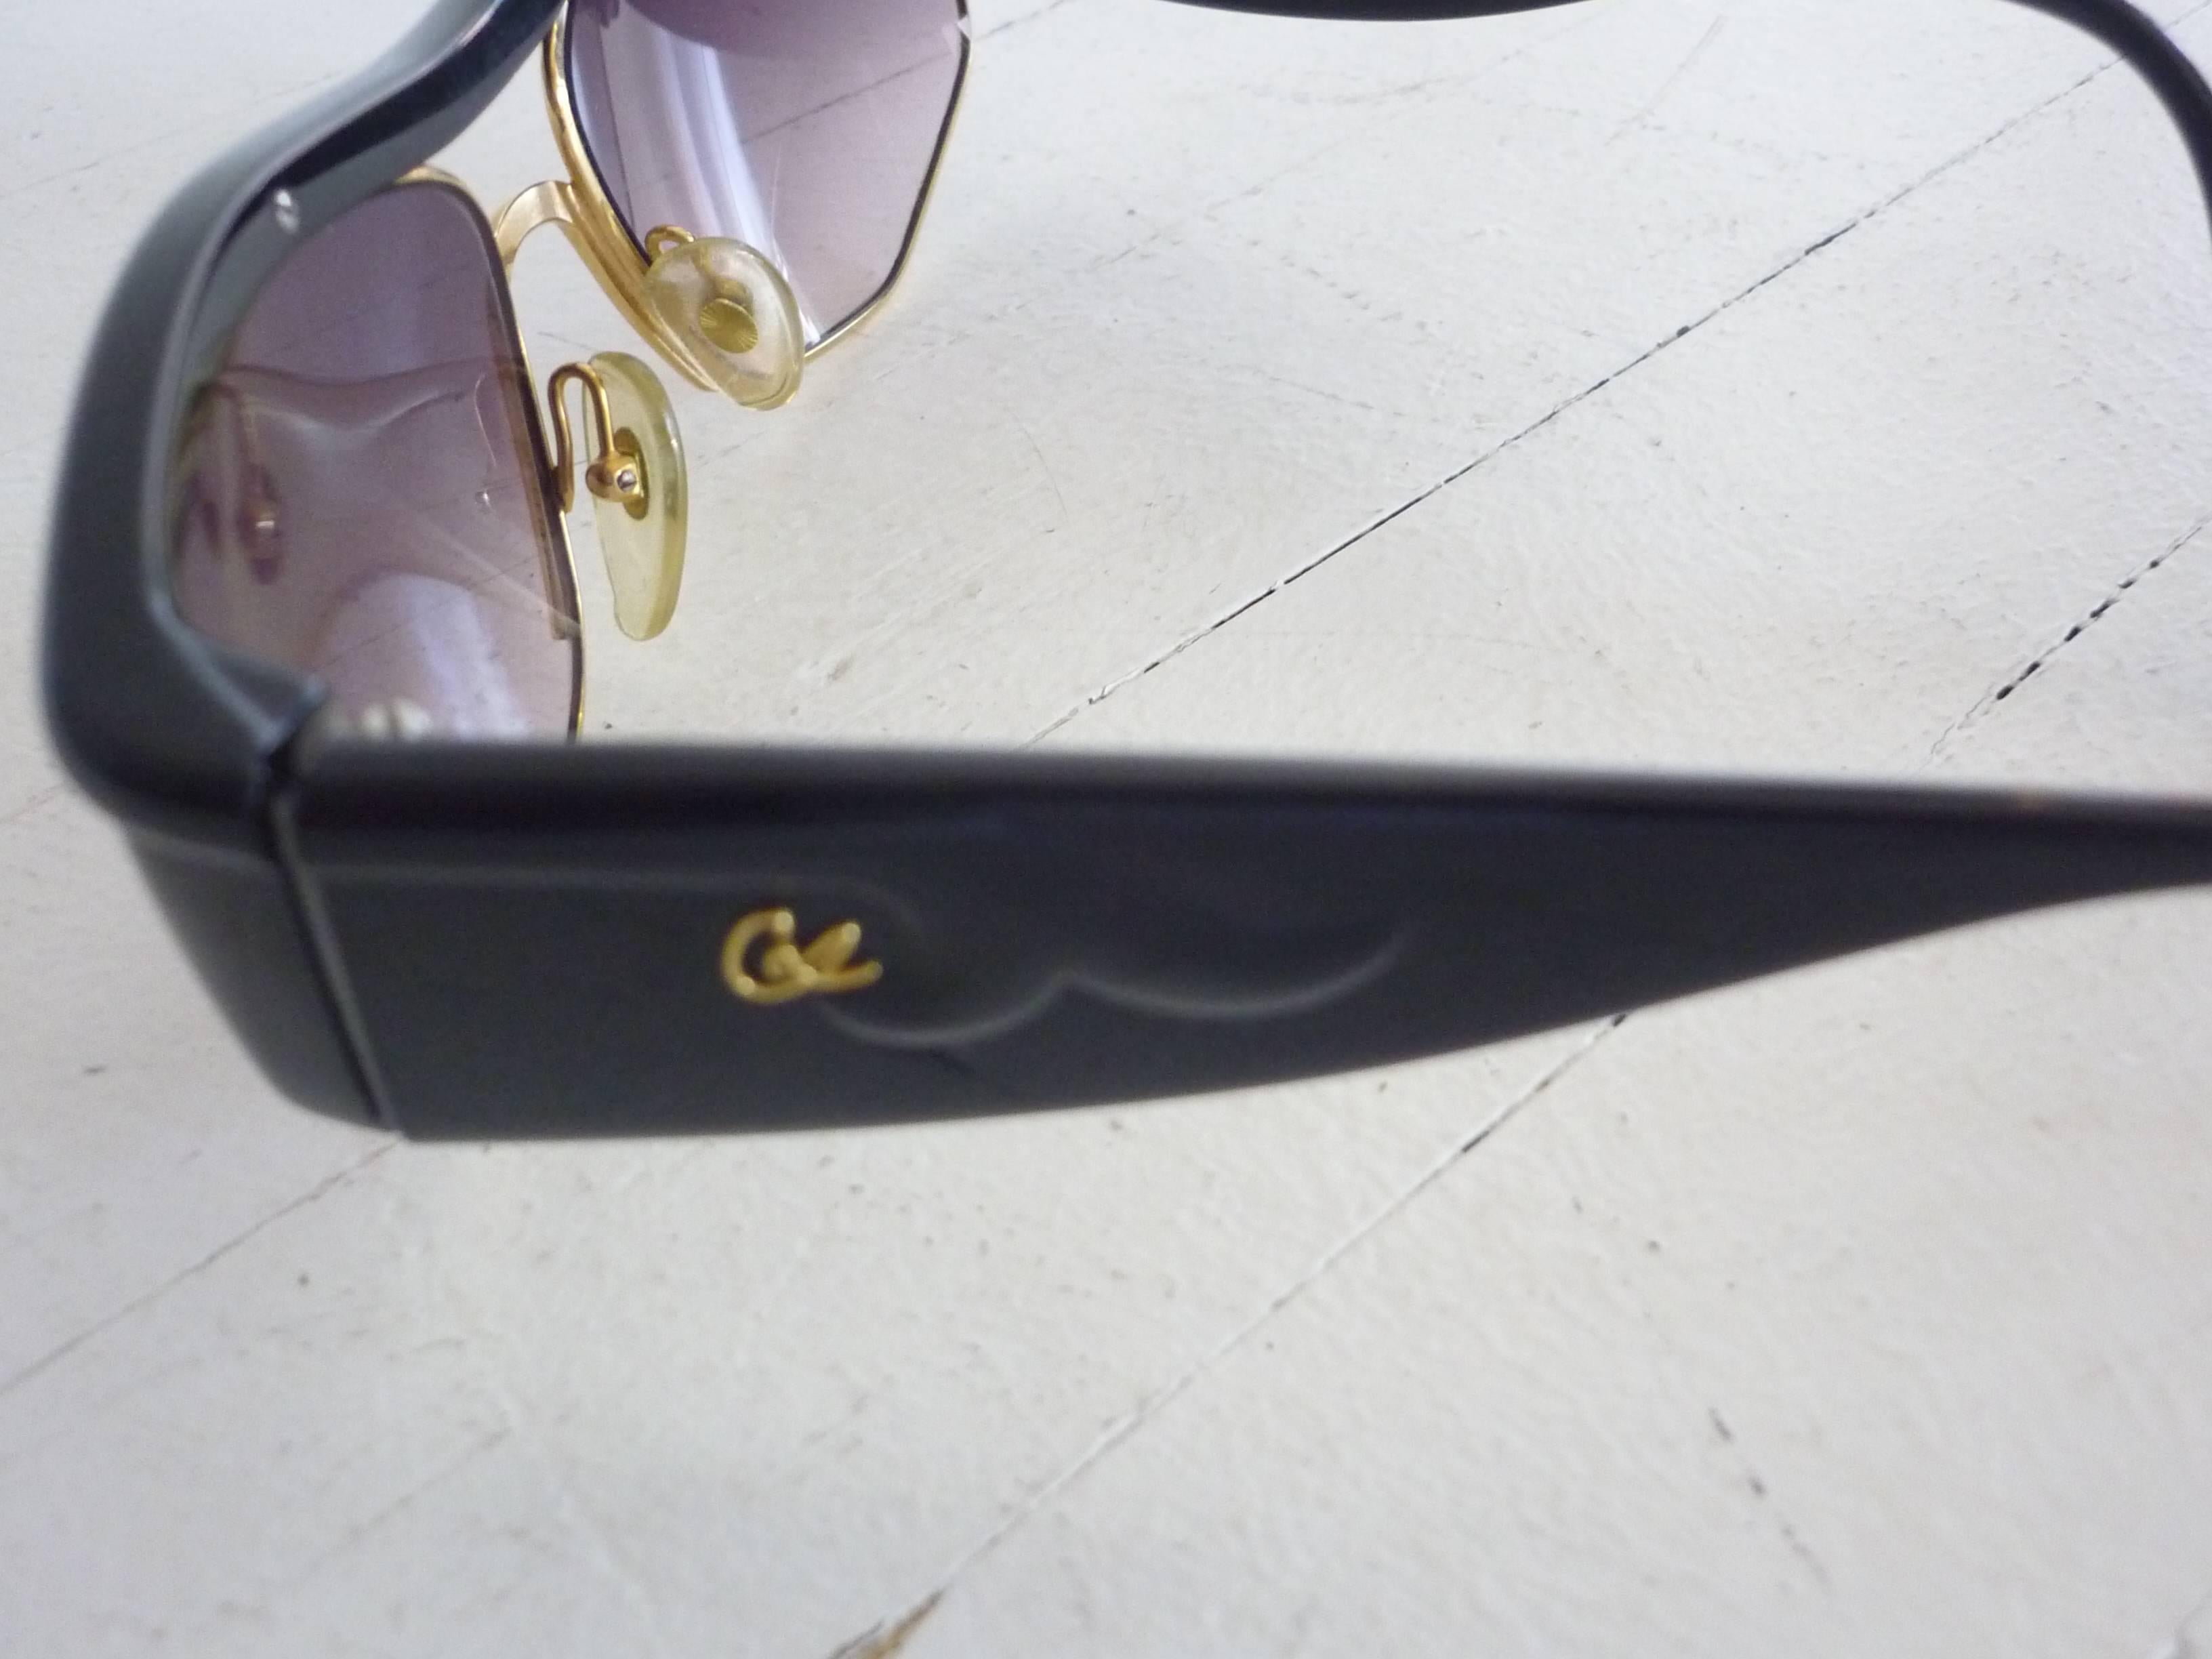 The frame is in black Optyl with shaded lenses rimmed in gold metal; the arms wide, and the CL logo in raised gold on each arm.

These sunglasses were made in Austria. I will send them in a quilted satinee case, but it is not the original.